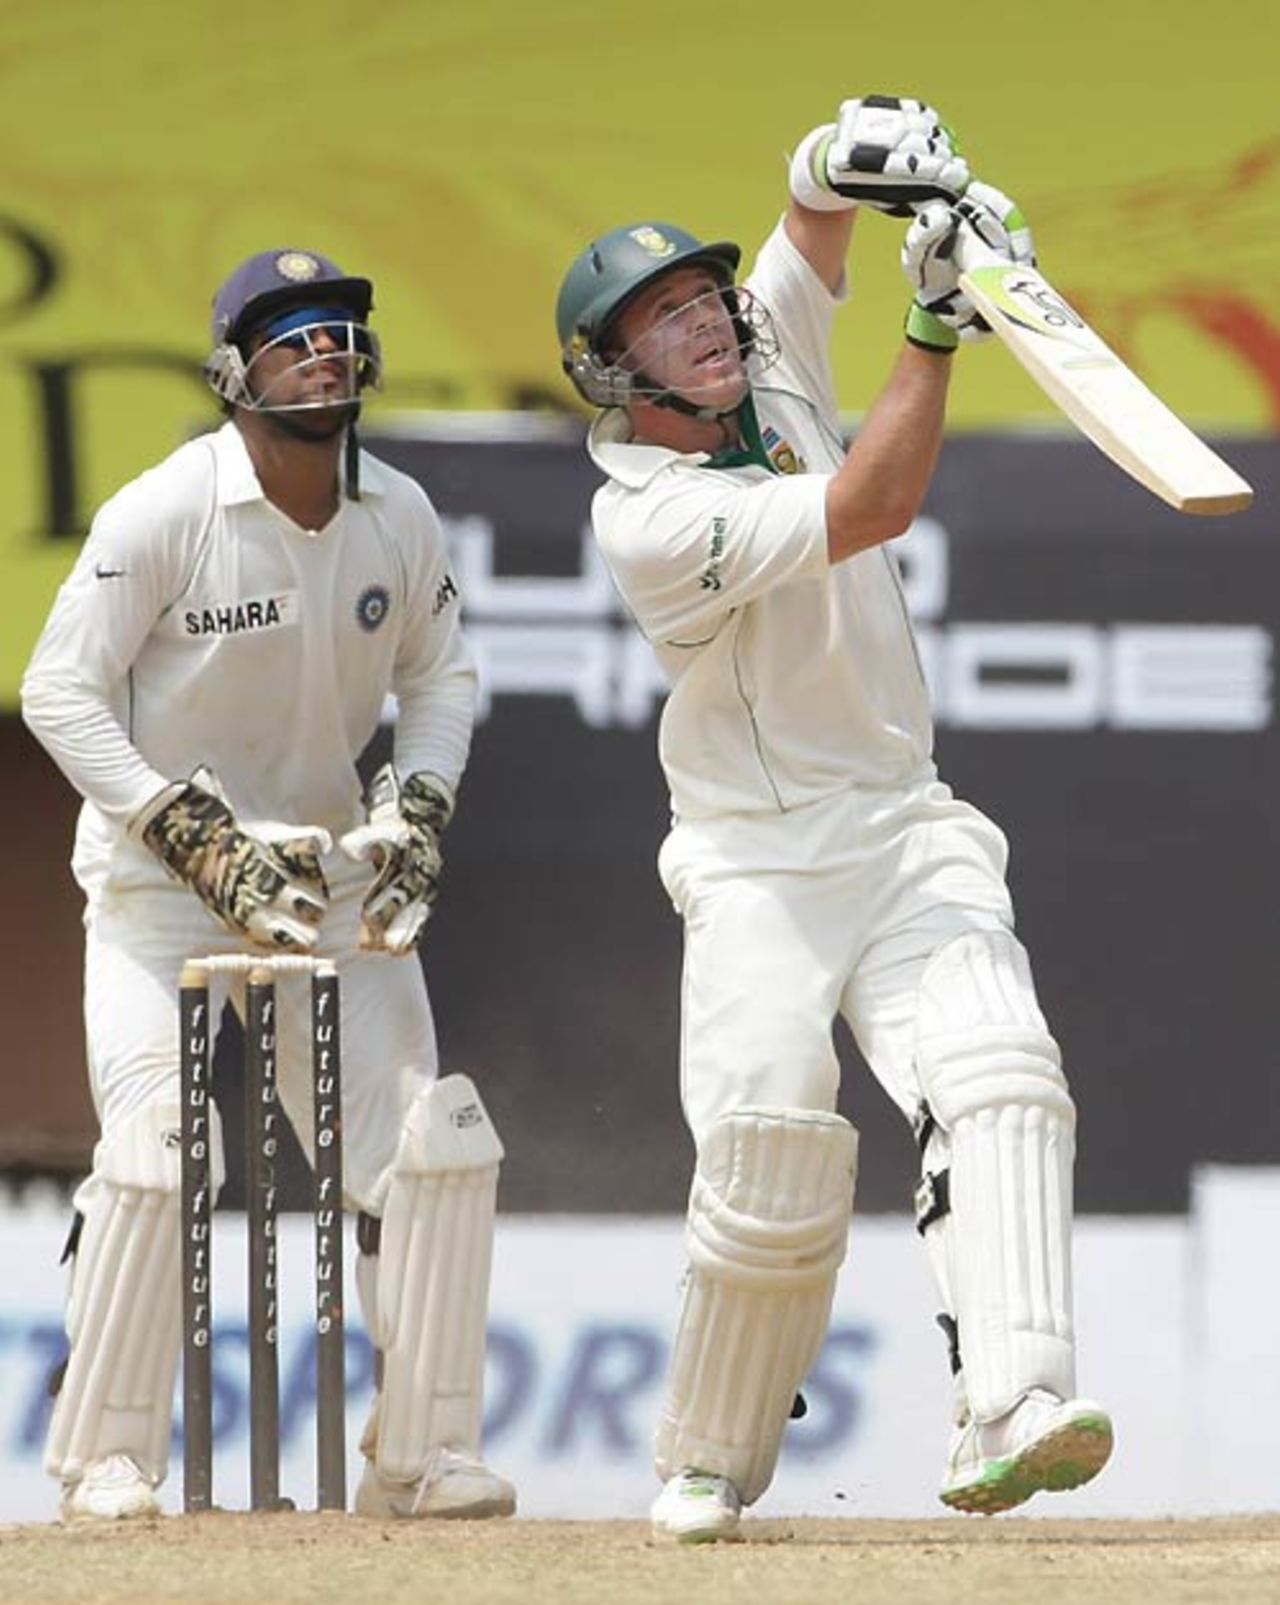 AB de Villiers chips one high in the air, India v South Africa, 1st Test, Chennai, 5th day, March 30, 2008 